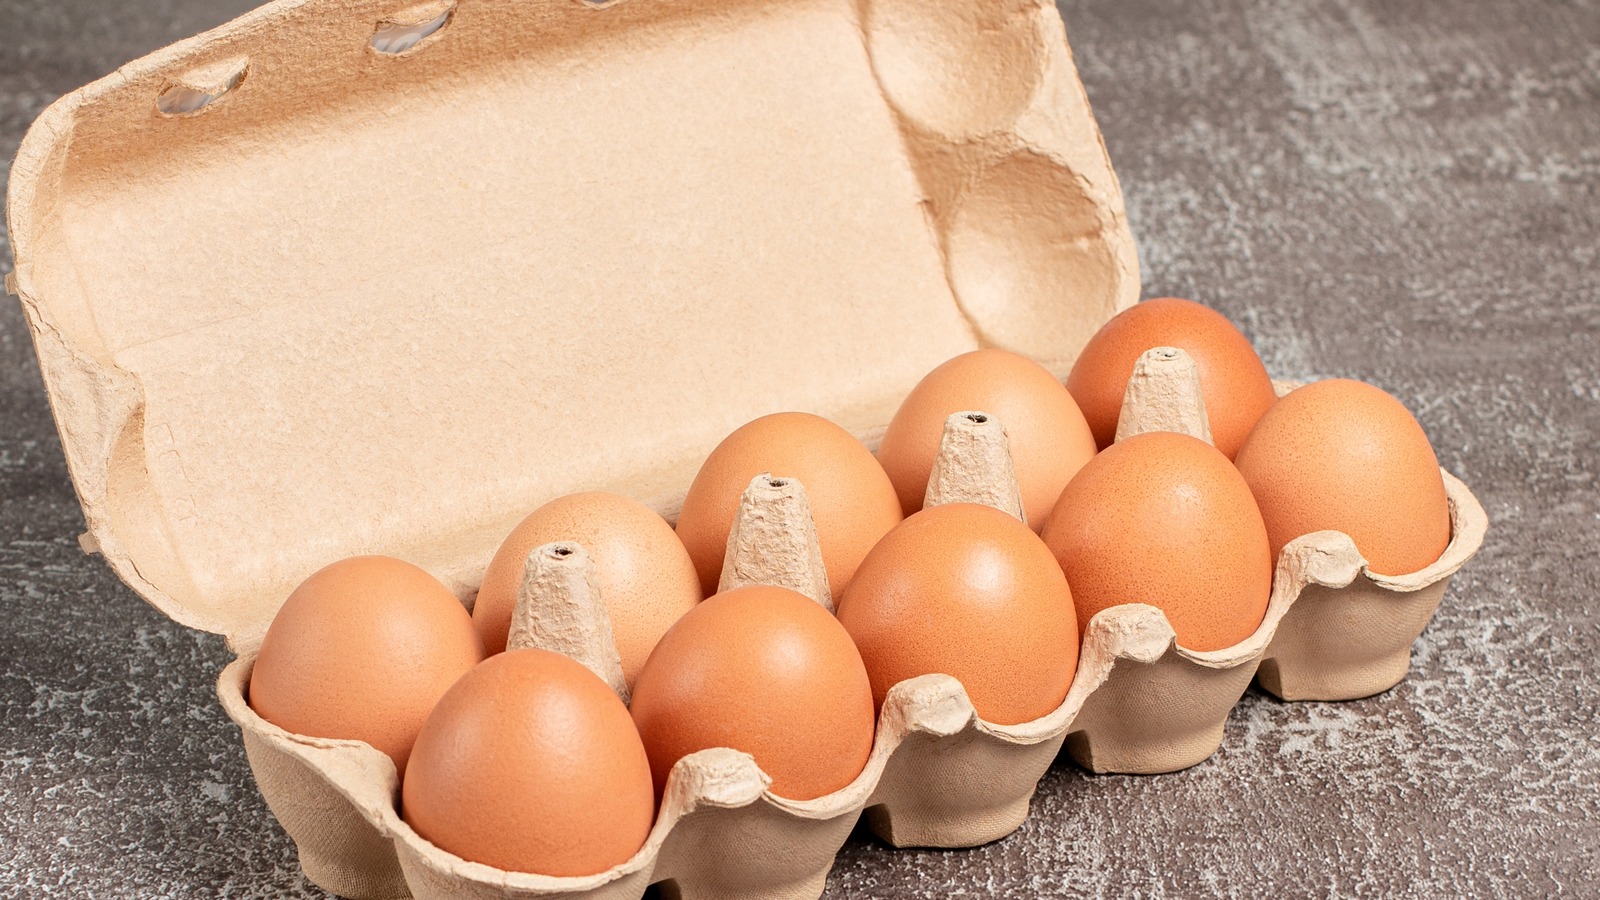 18 Ways To Use Egg Cartons To Make Cooking Easier